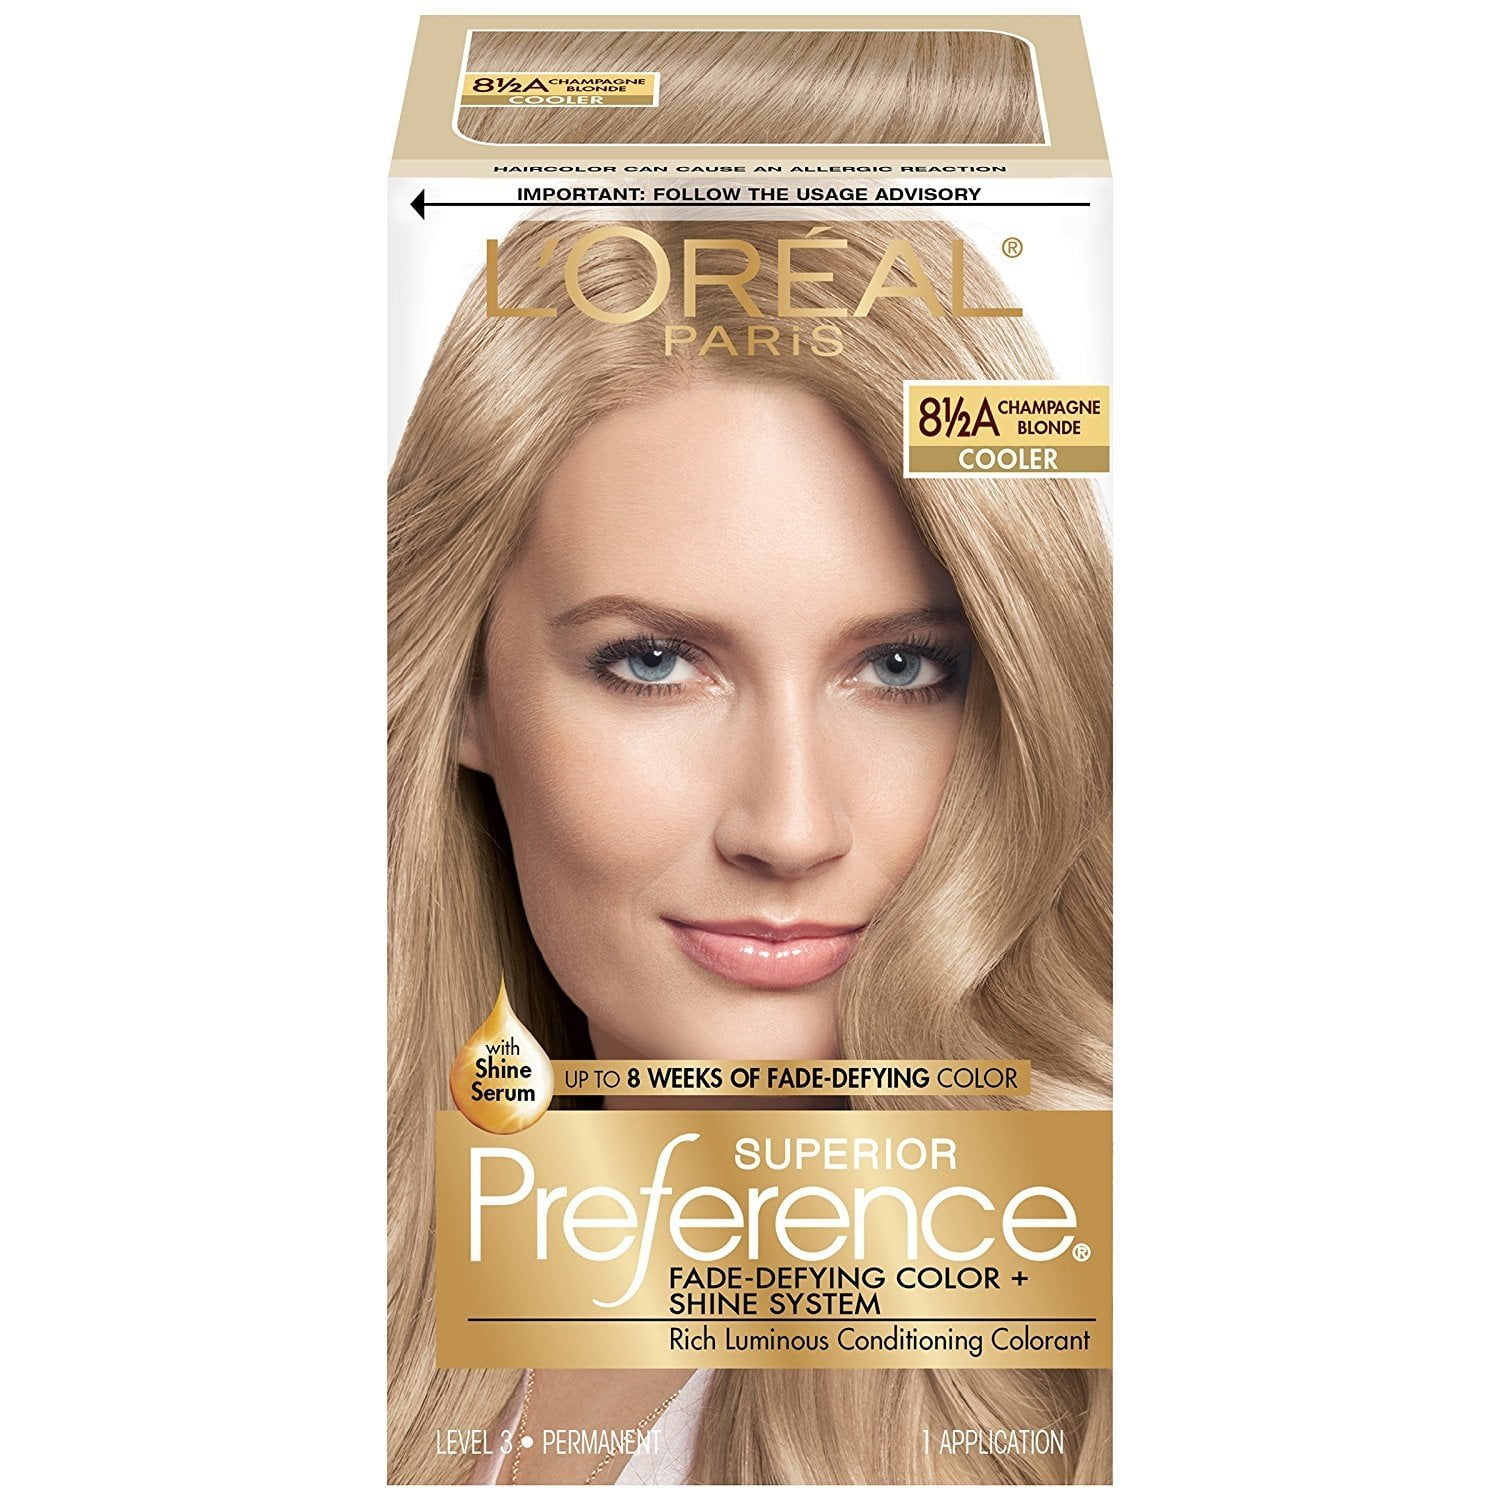 L'Oreal Paris Superior Preference Fade-Defying Shine Permanent Hair Color,   Champagne Blonde, 1 Kit 